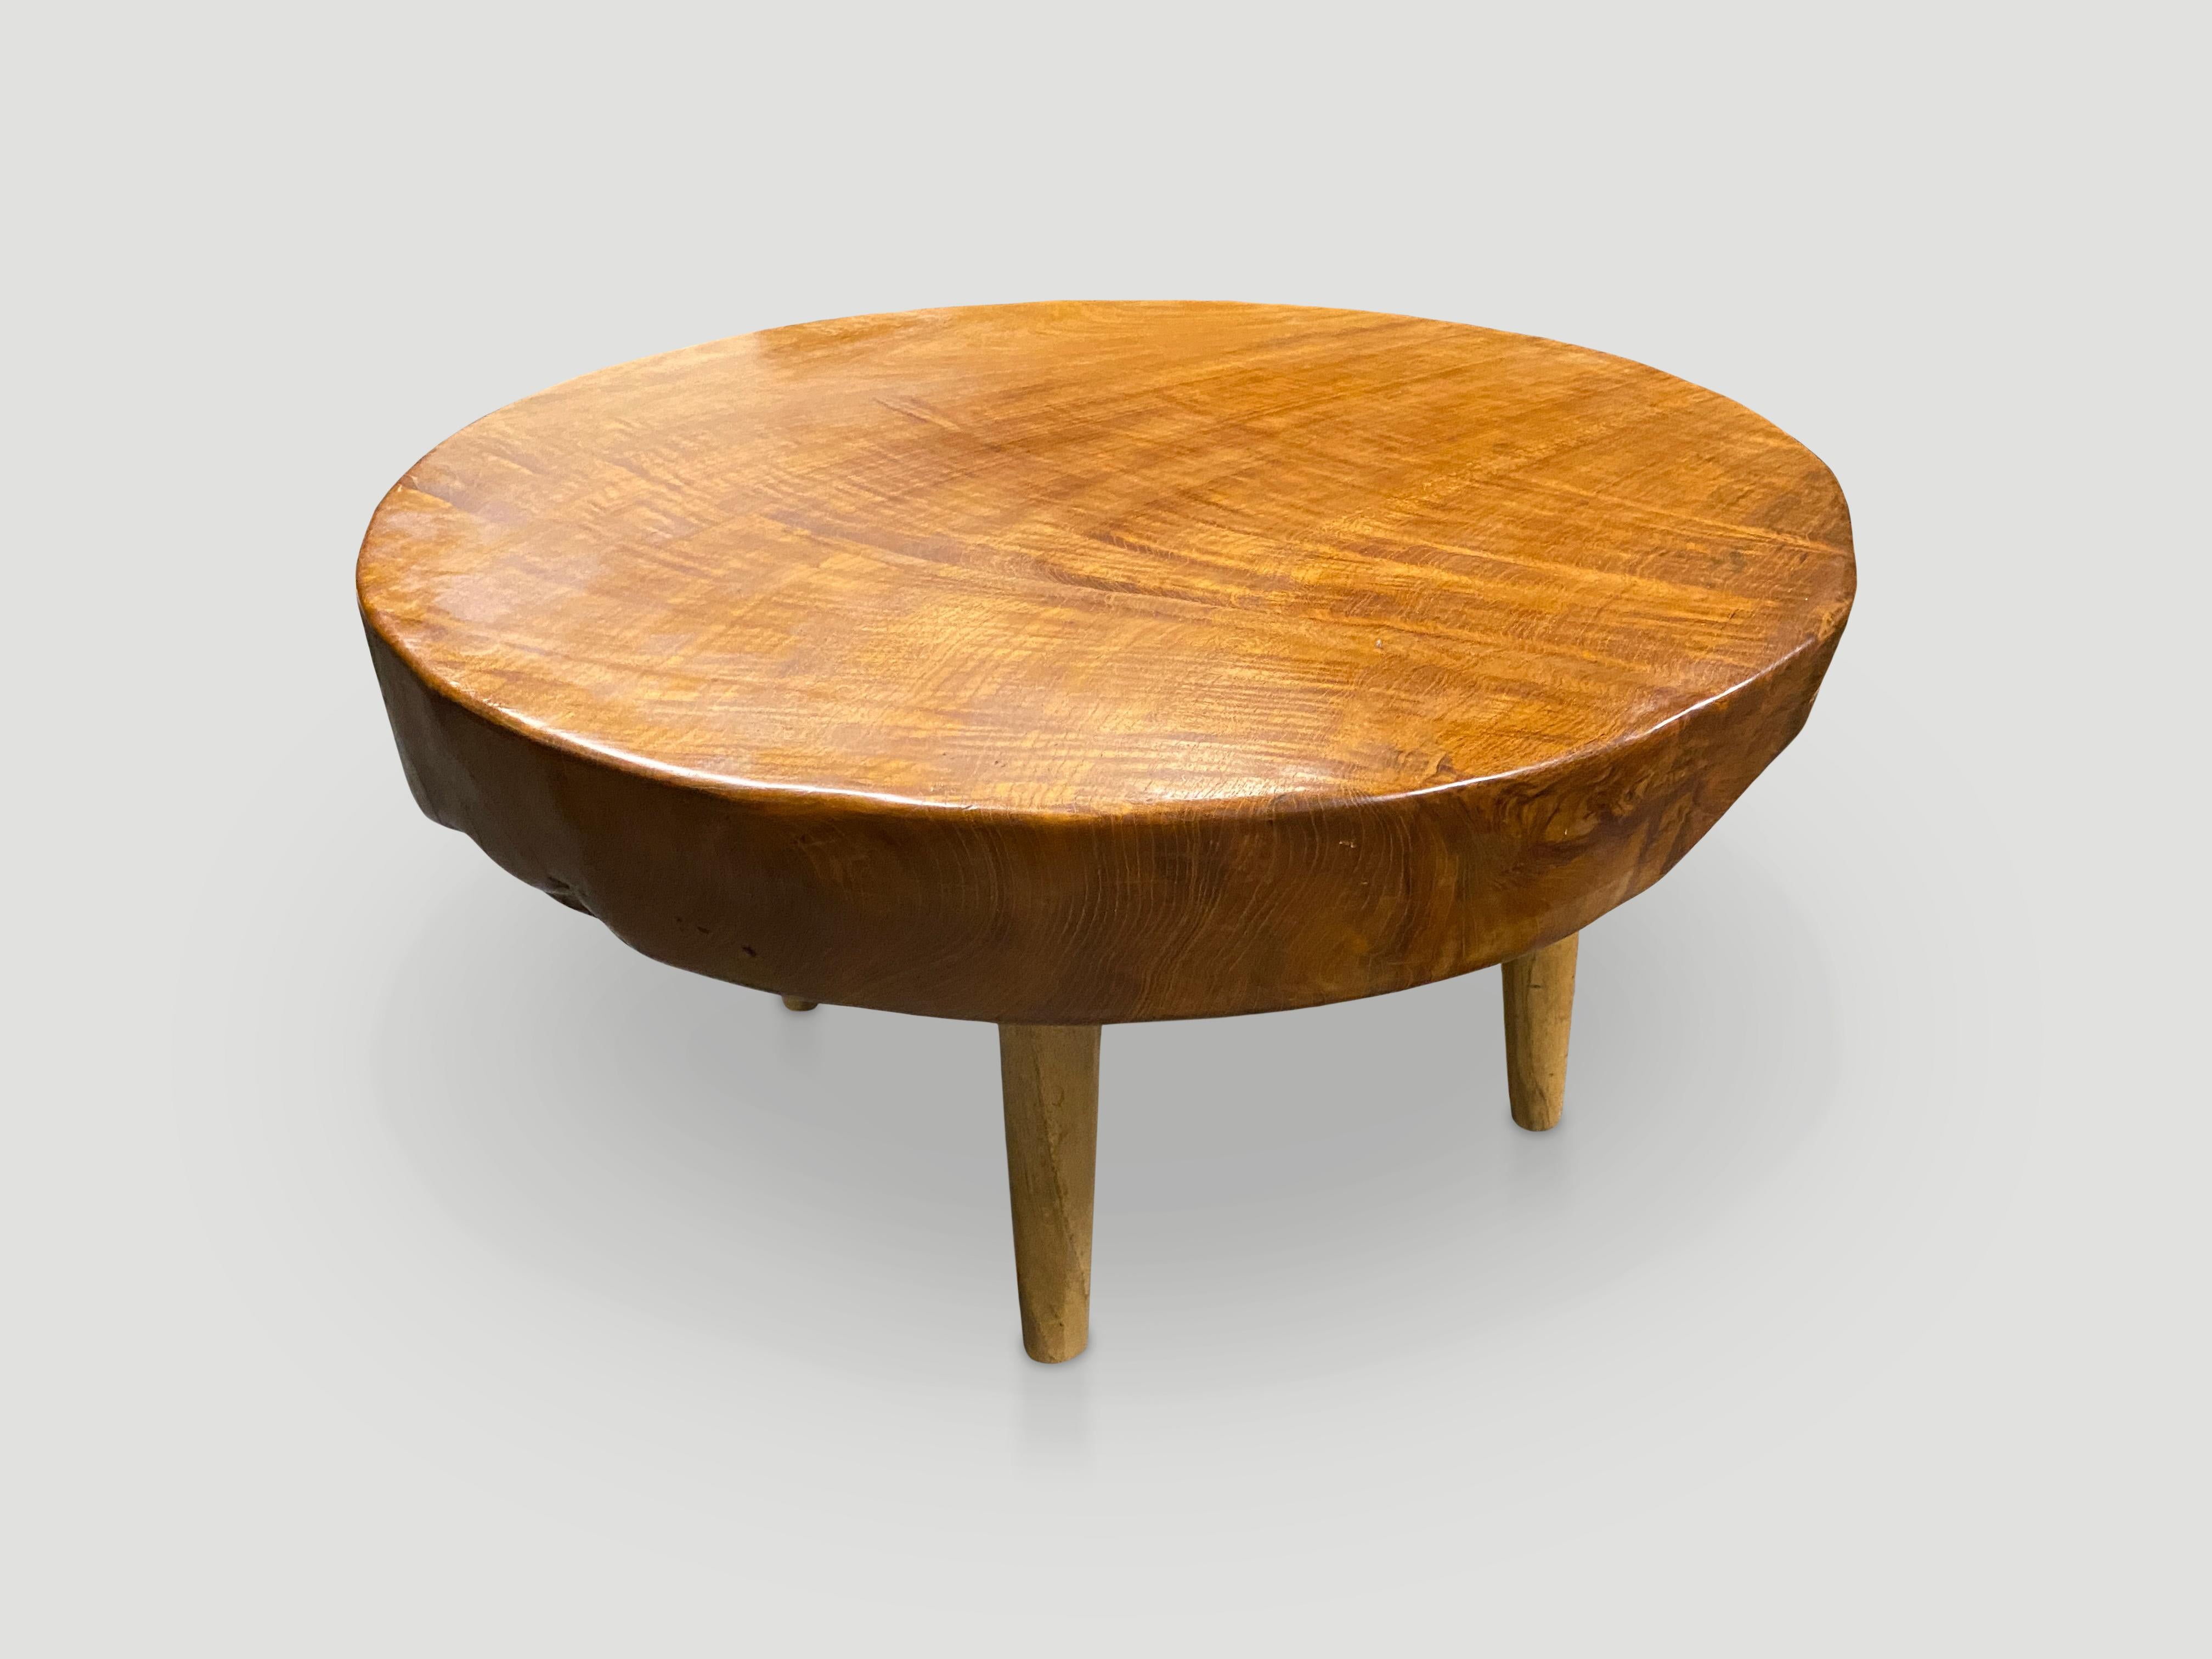 Impressive four inch reclaimed teak wood single slab coffee table. Floating on mid century style cone legs and finished with a natural oil revealing the beautiful wood grain. Organic with a twist.

Own an Andrianna Shamaris original.

Andrianna